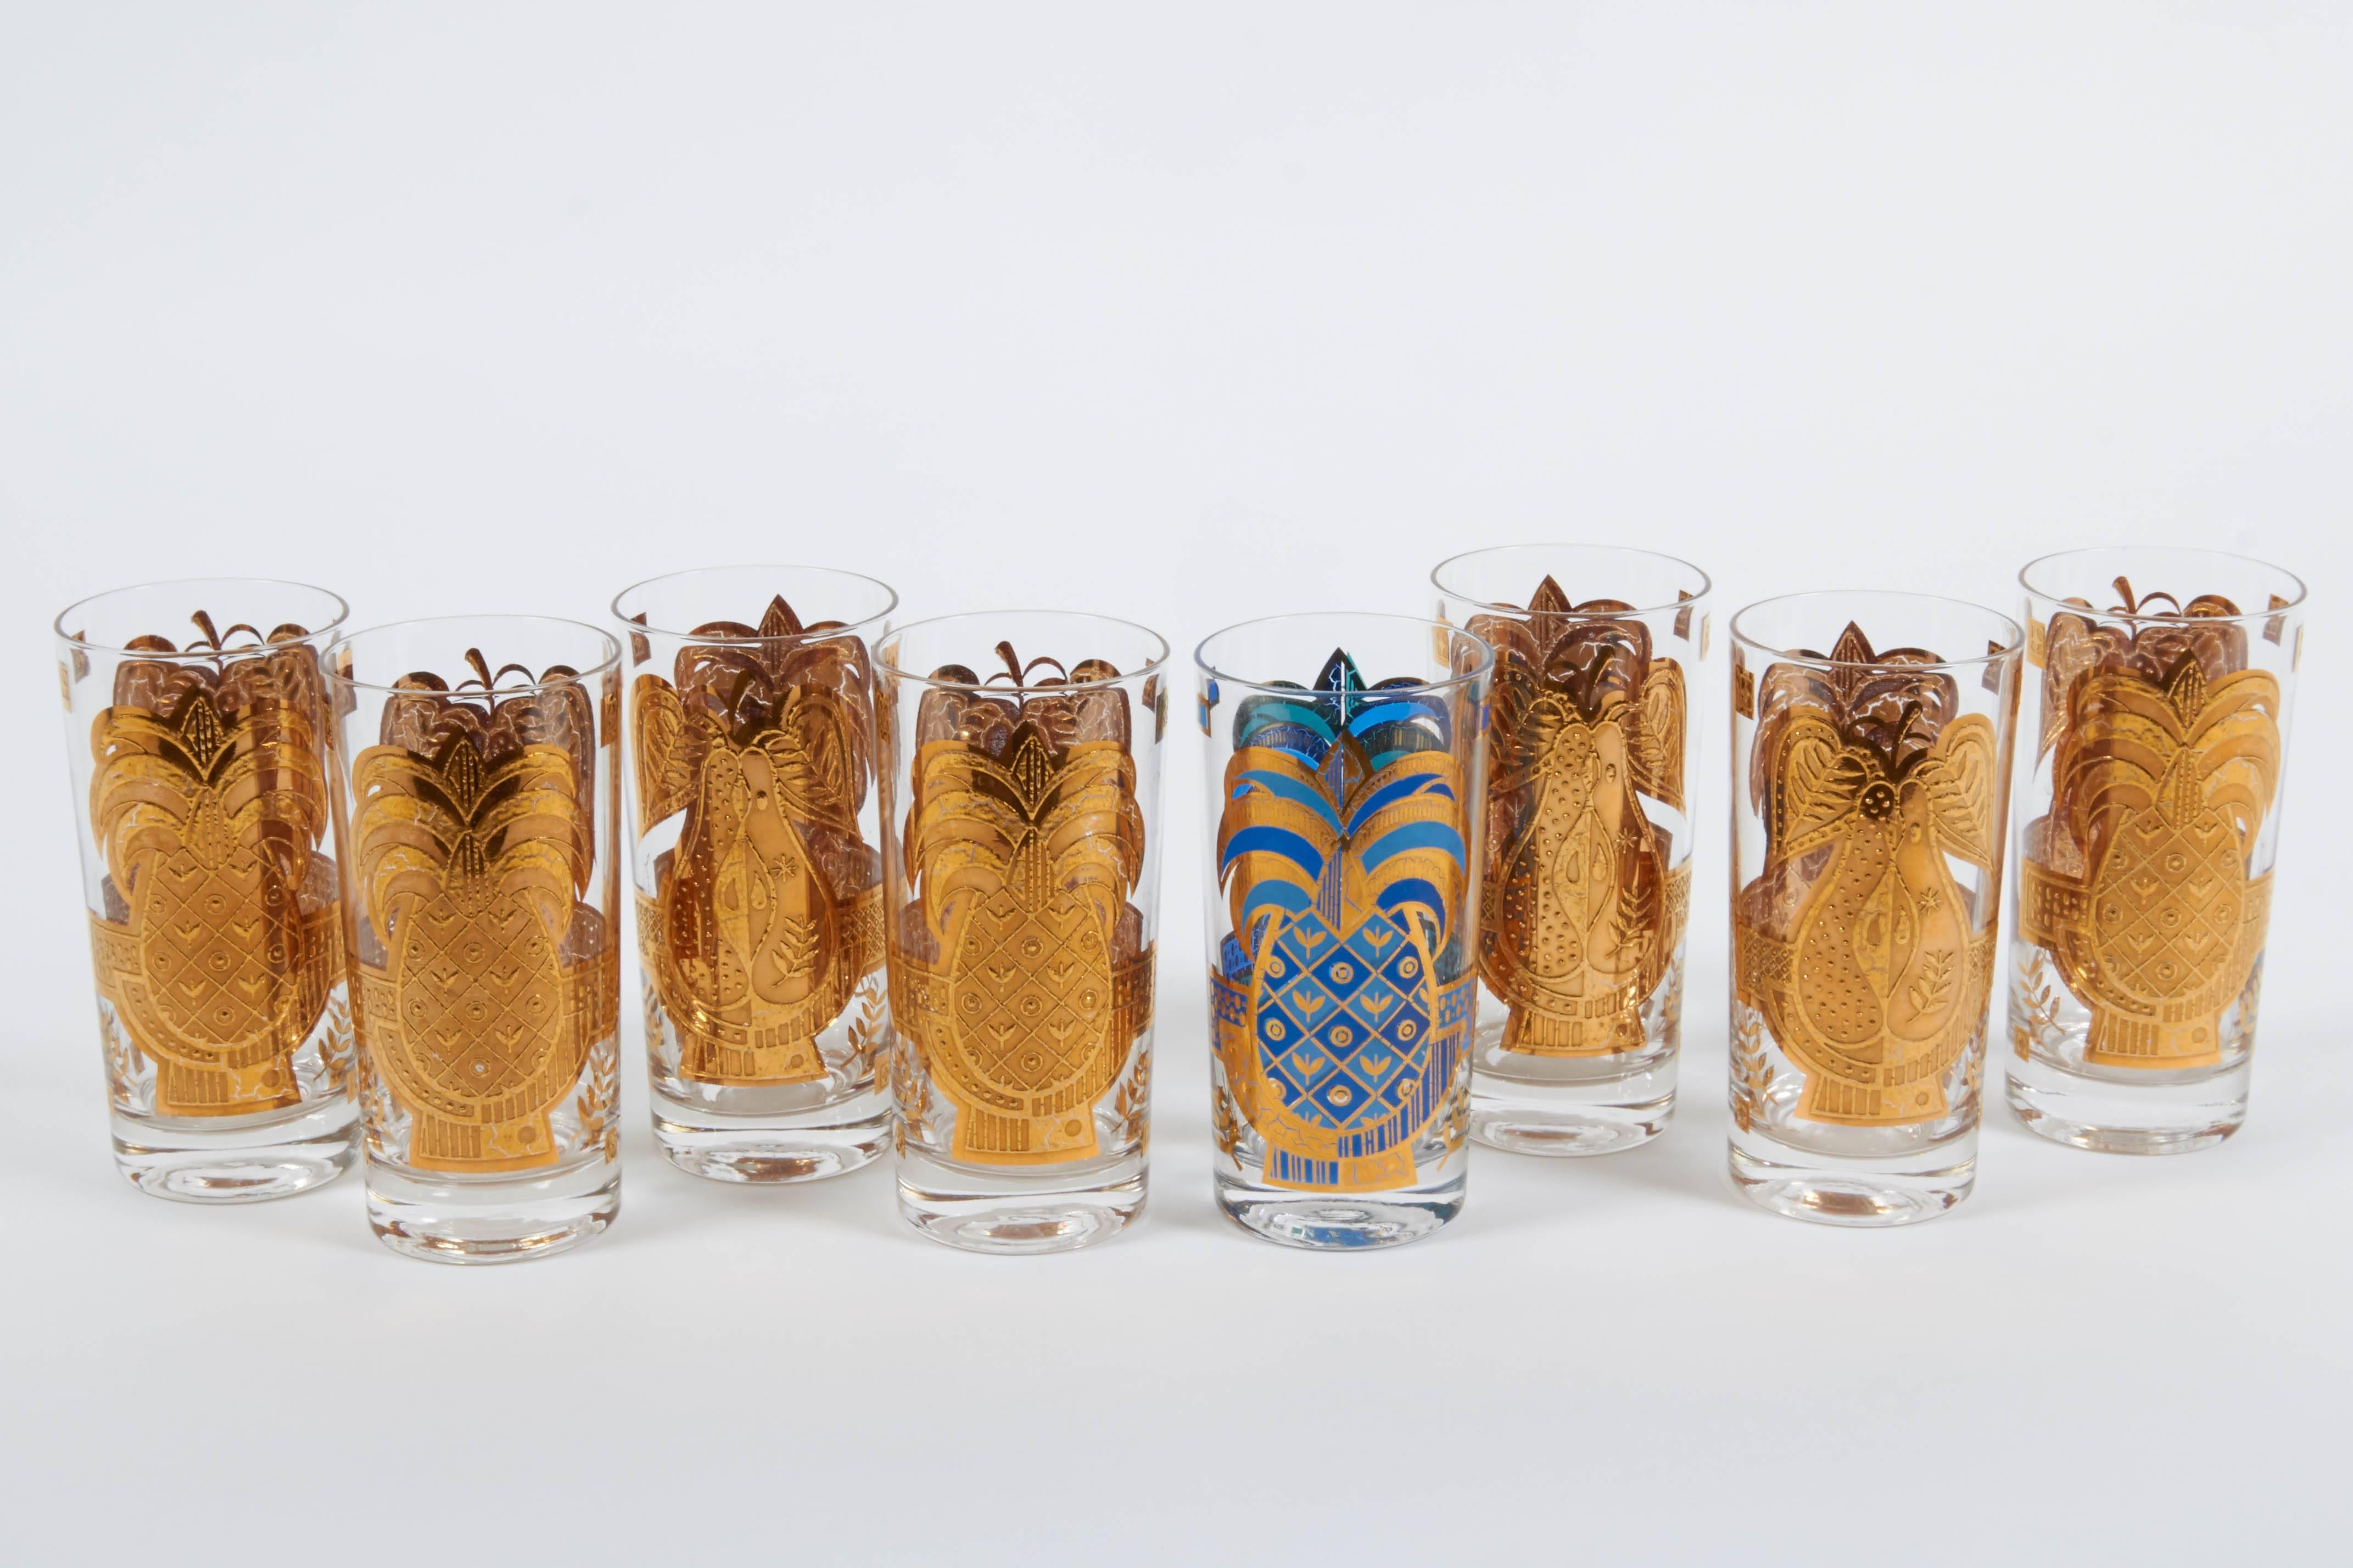 Set of seven gold glasses and one colored glass -
(Exceptionally rare configuration)

Quality grade: Mint unused vintage condition

Note: These glasses are quite exceptional and unique for entertaining. The inclusion of a 